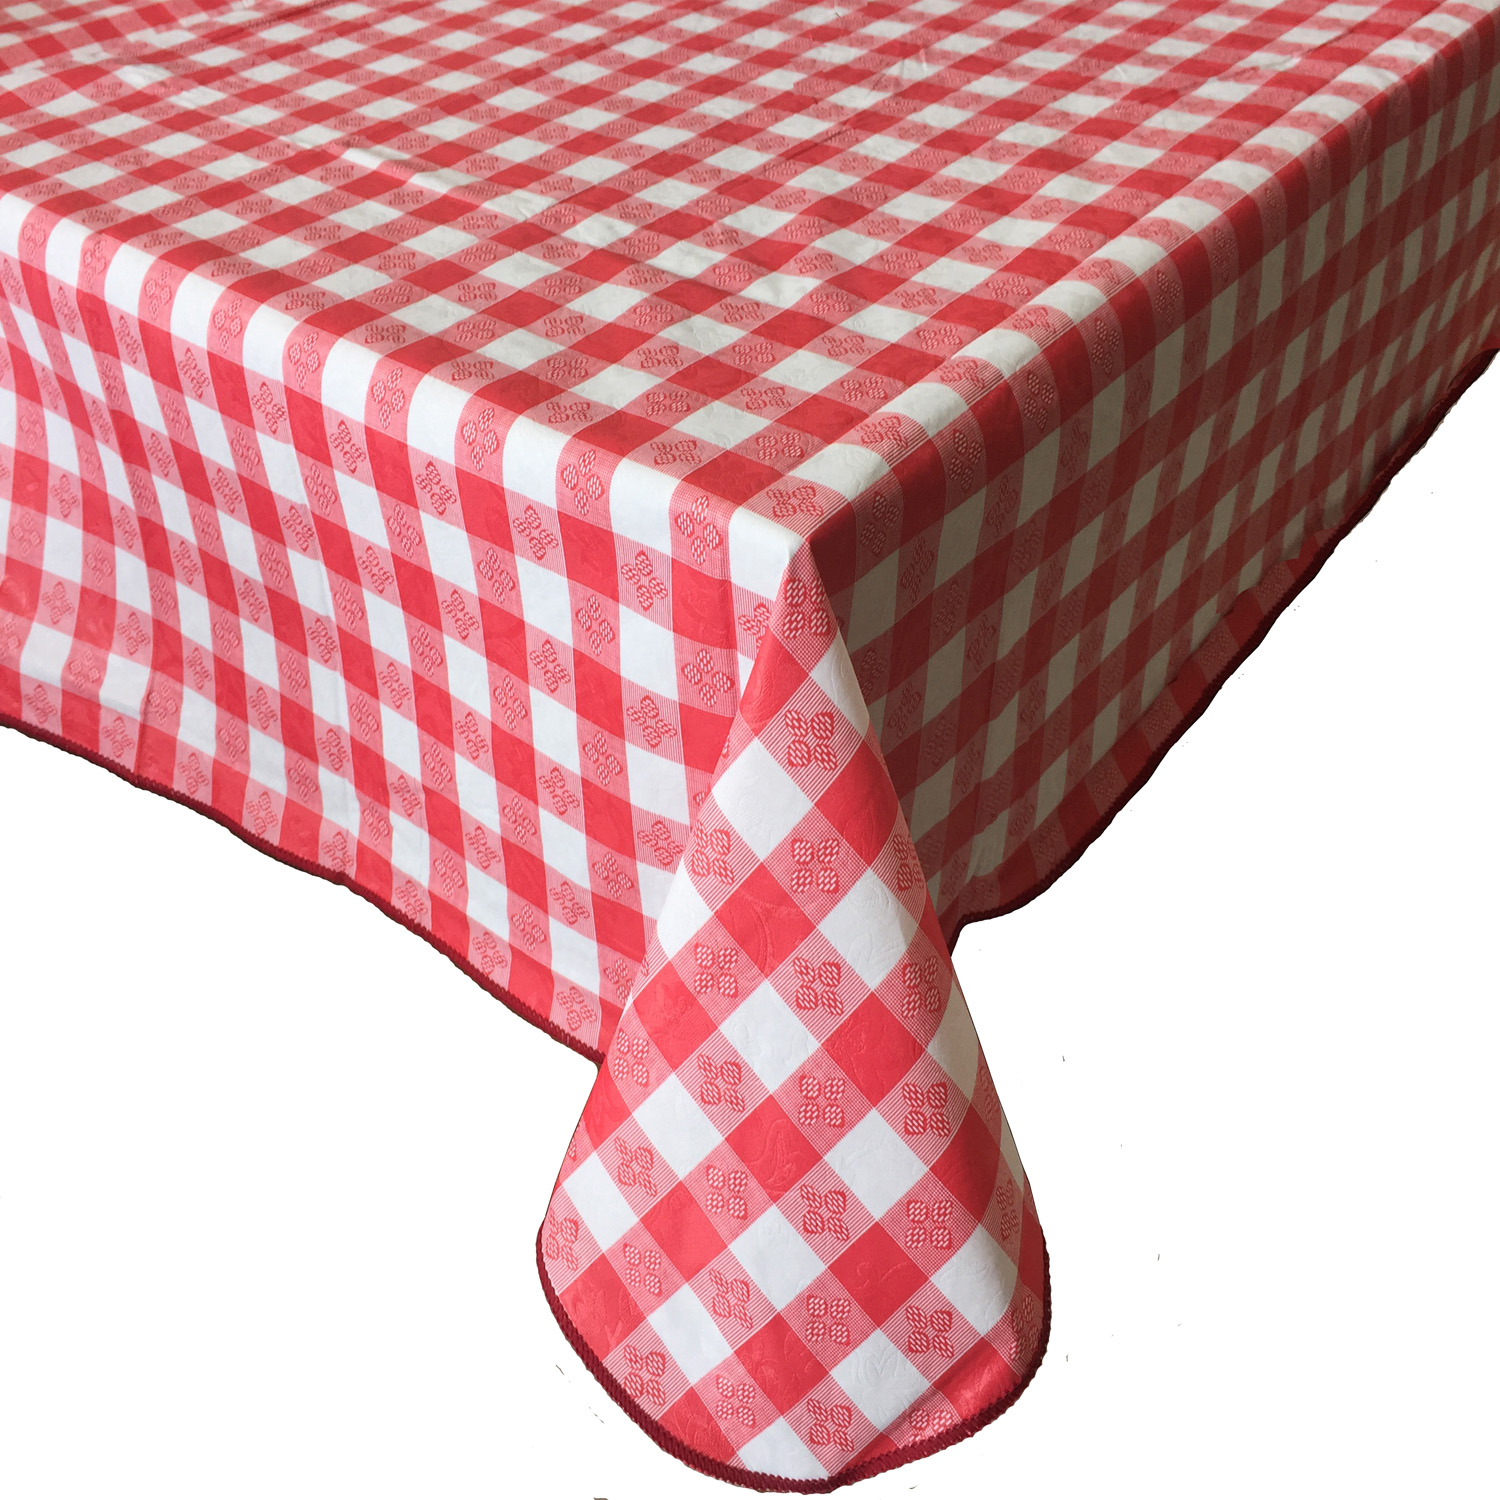 CAC China TCVG-9052R Red Vinyl Table Cover with Flannel Back 90" x 52"